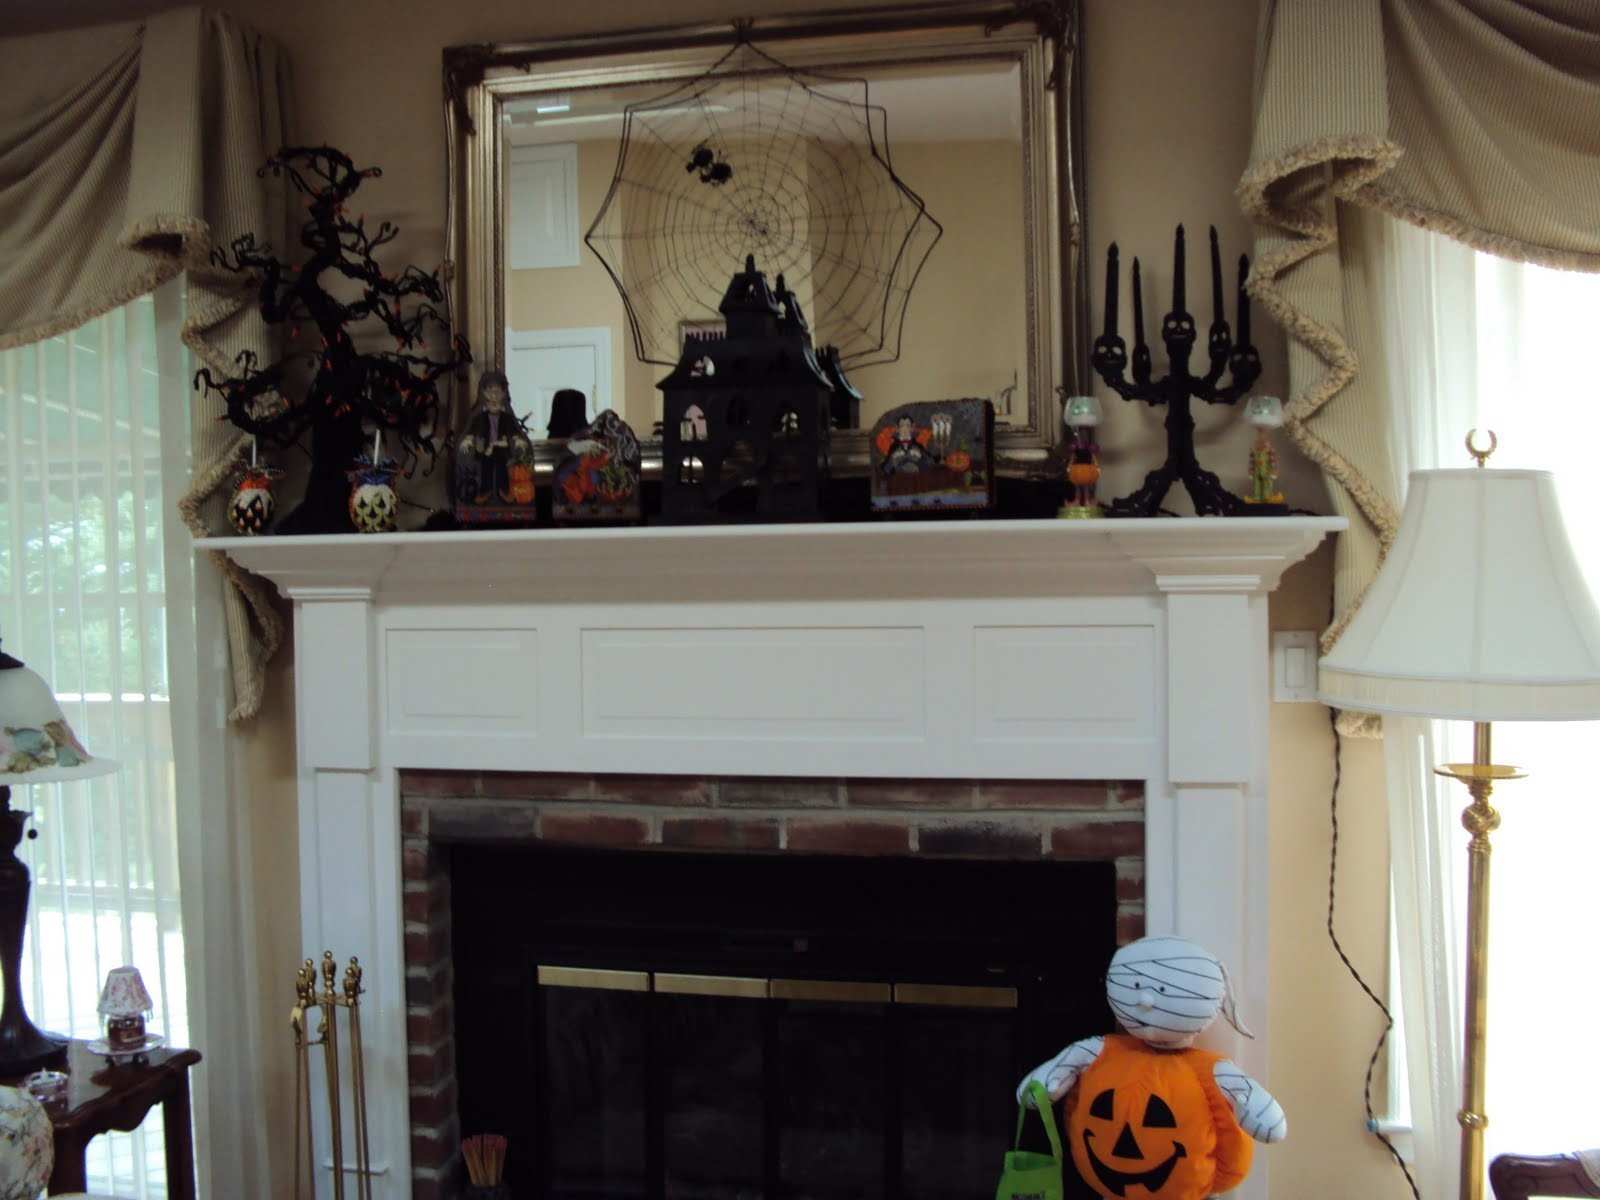 Diy Fireplace Mantel Best Of Free Download Image Lovely Mantel Mirrors 650 488 Mantel